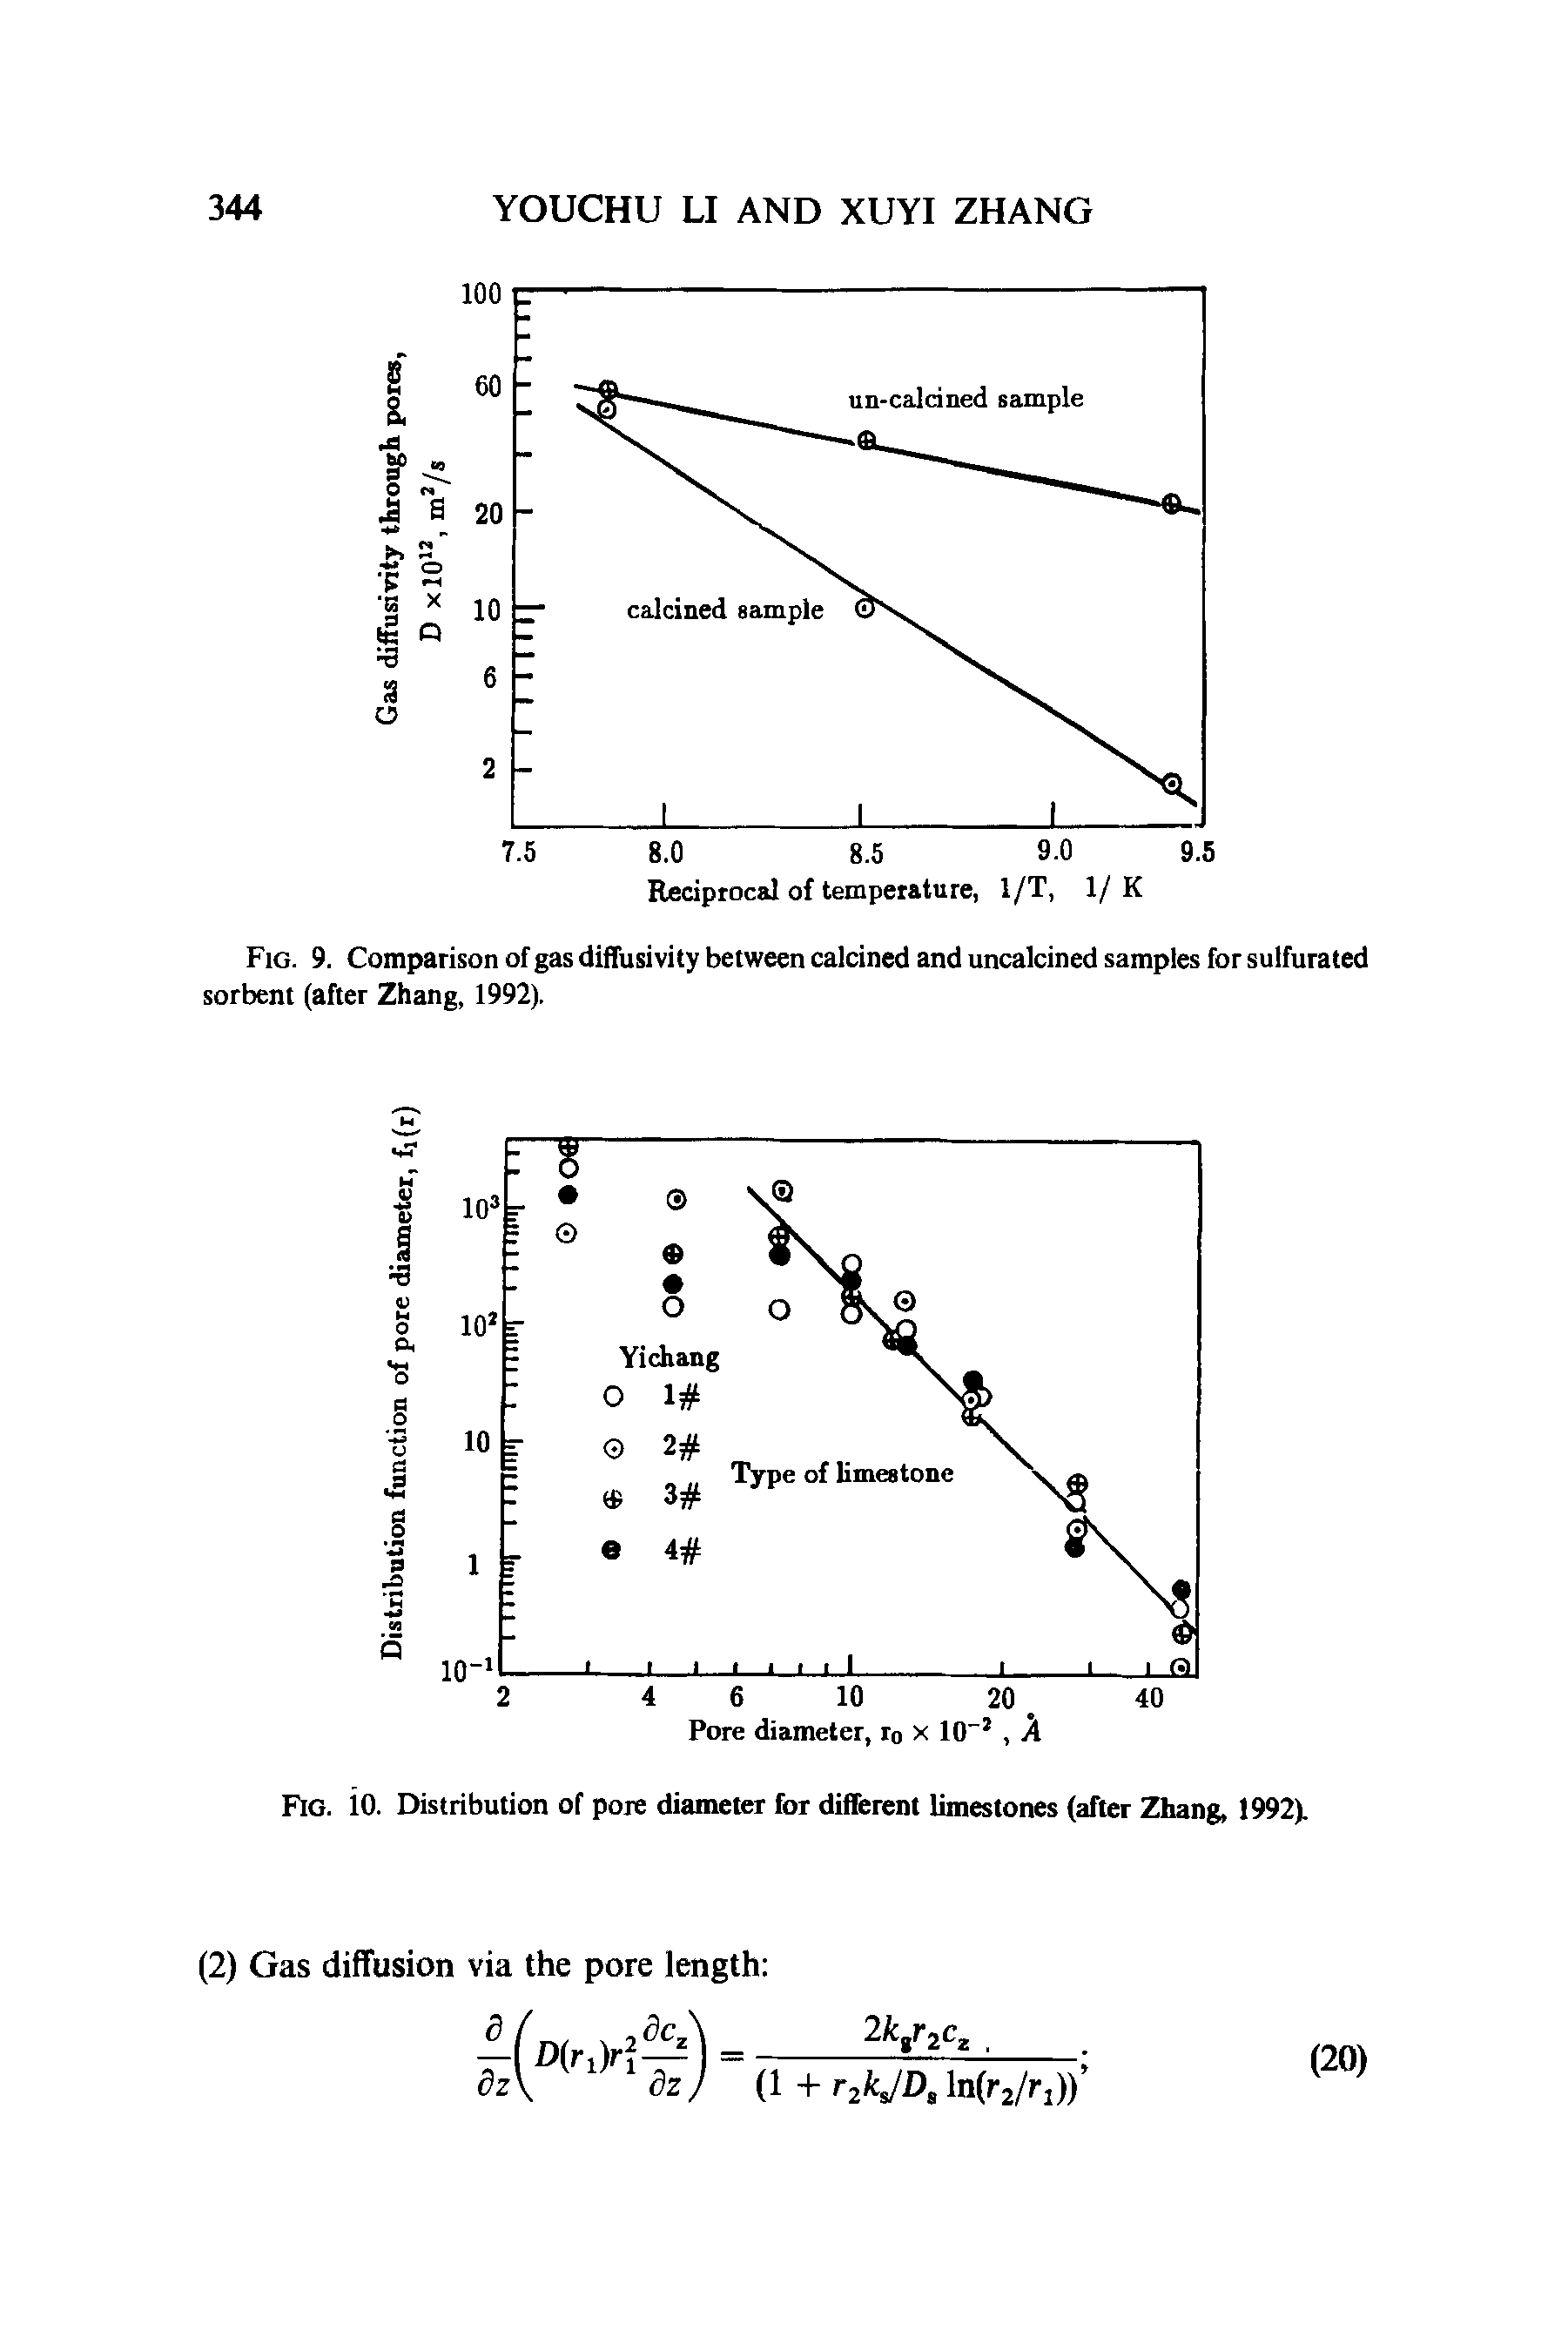 Fig. 9. Comparison of gas diflusivity between calcined and uncalcined samples for sulfurated sorbent (after Zhang, 1992).